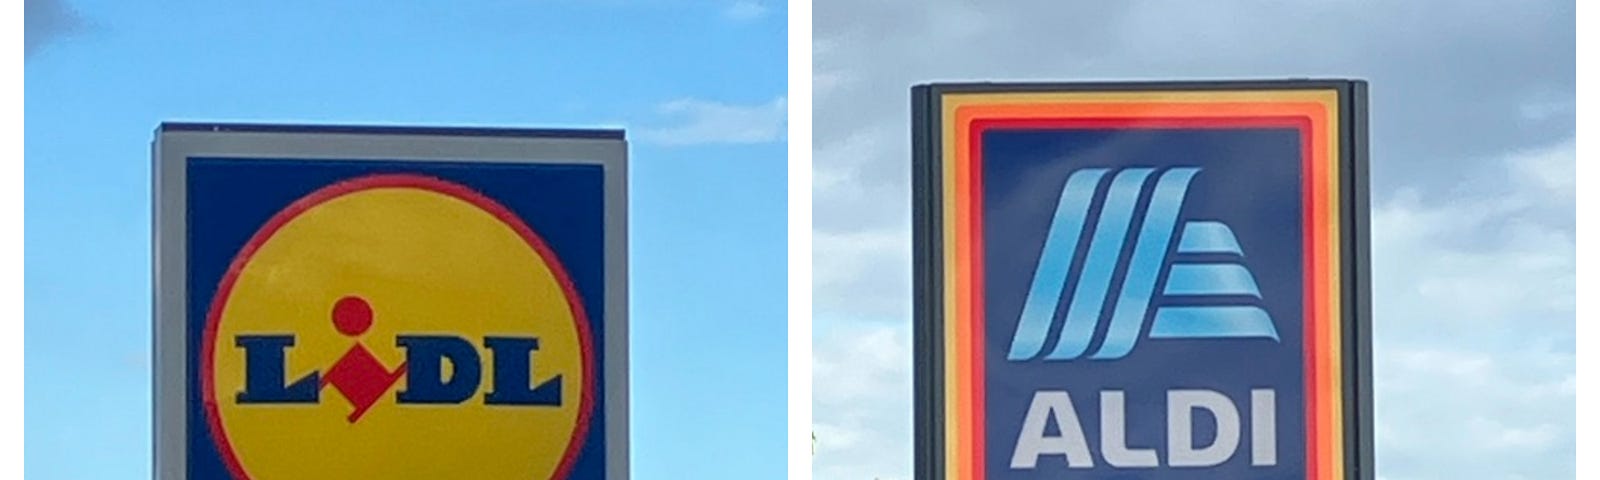 Side-by-side photo of lidl and aldi signs.